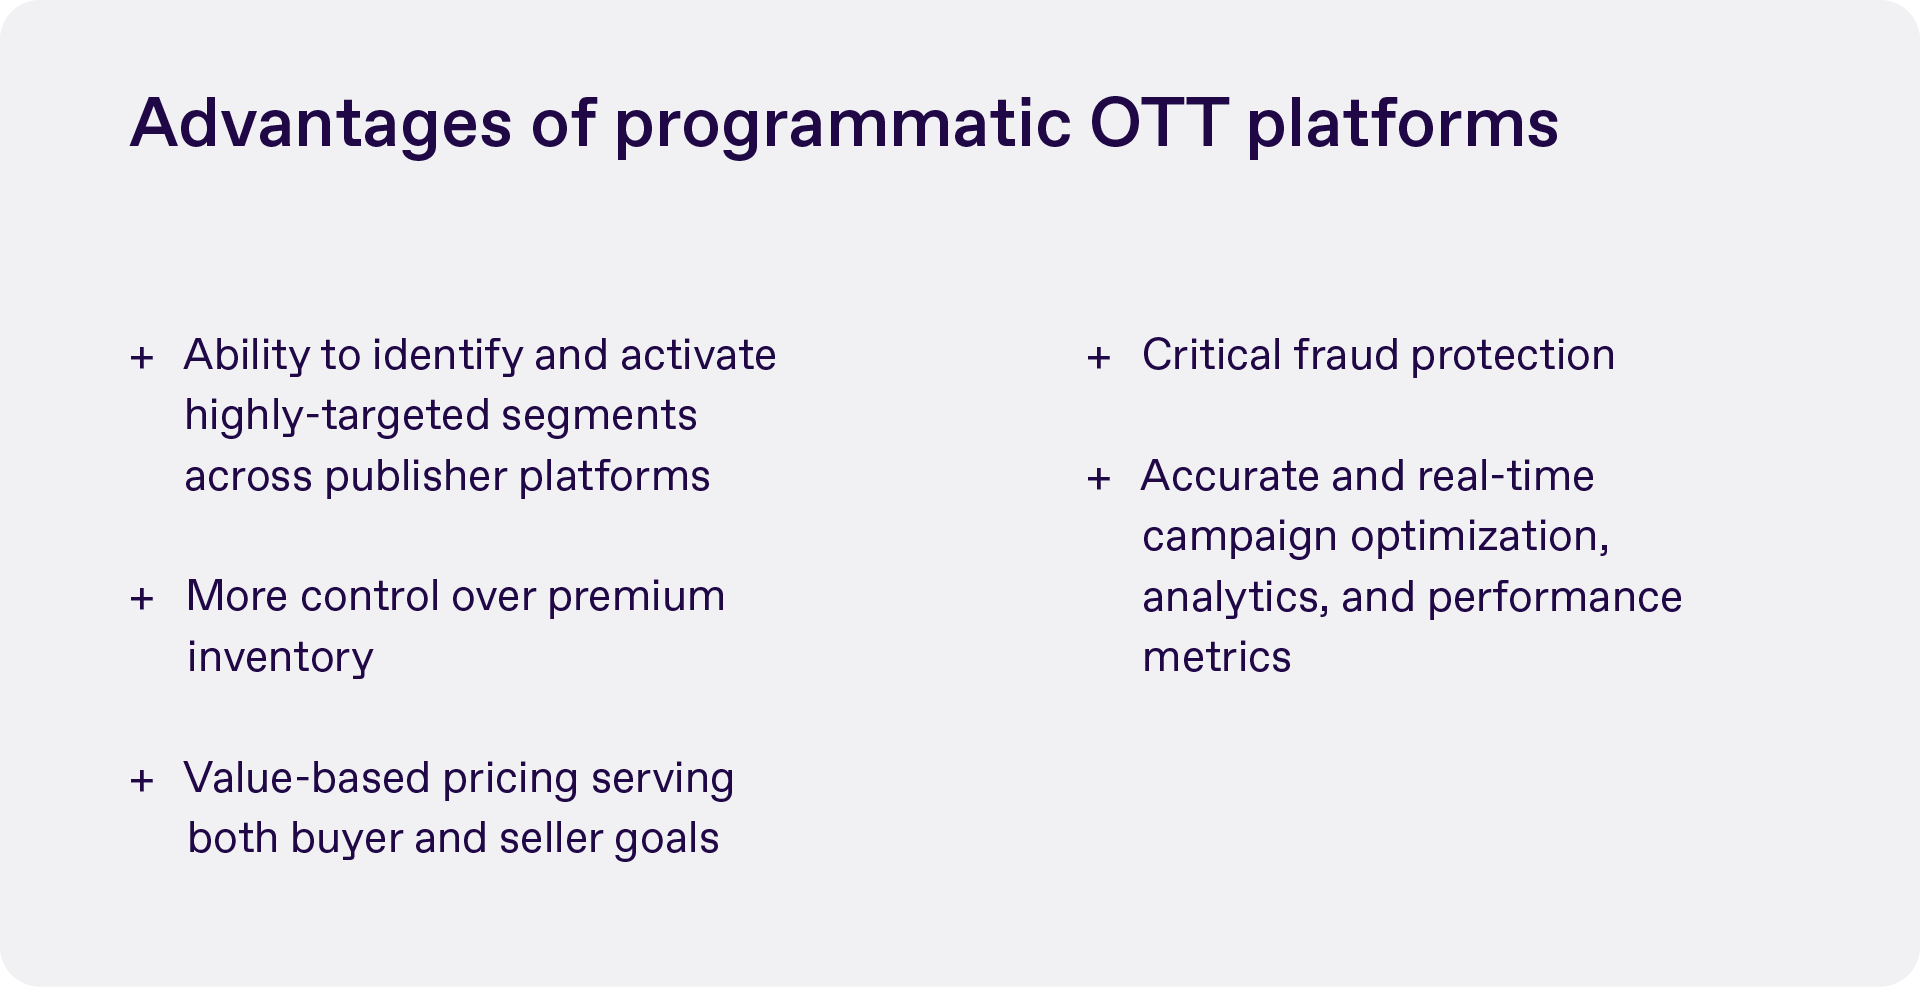 Graphic showing advantages of programmatic OTT platforms including: 
- ability to identify and activate highly targeted segments across publisher platforms 
- more control over premium inventory 
- value-based pricing serving both buyer and seller goals 
- critical fraud protection 
- accurate and real-time campaign optimization, analytics, and performance metrics